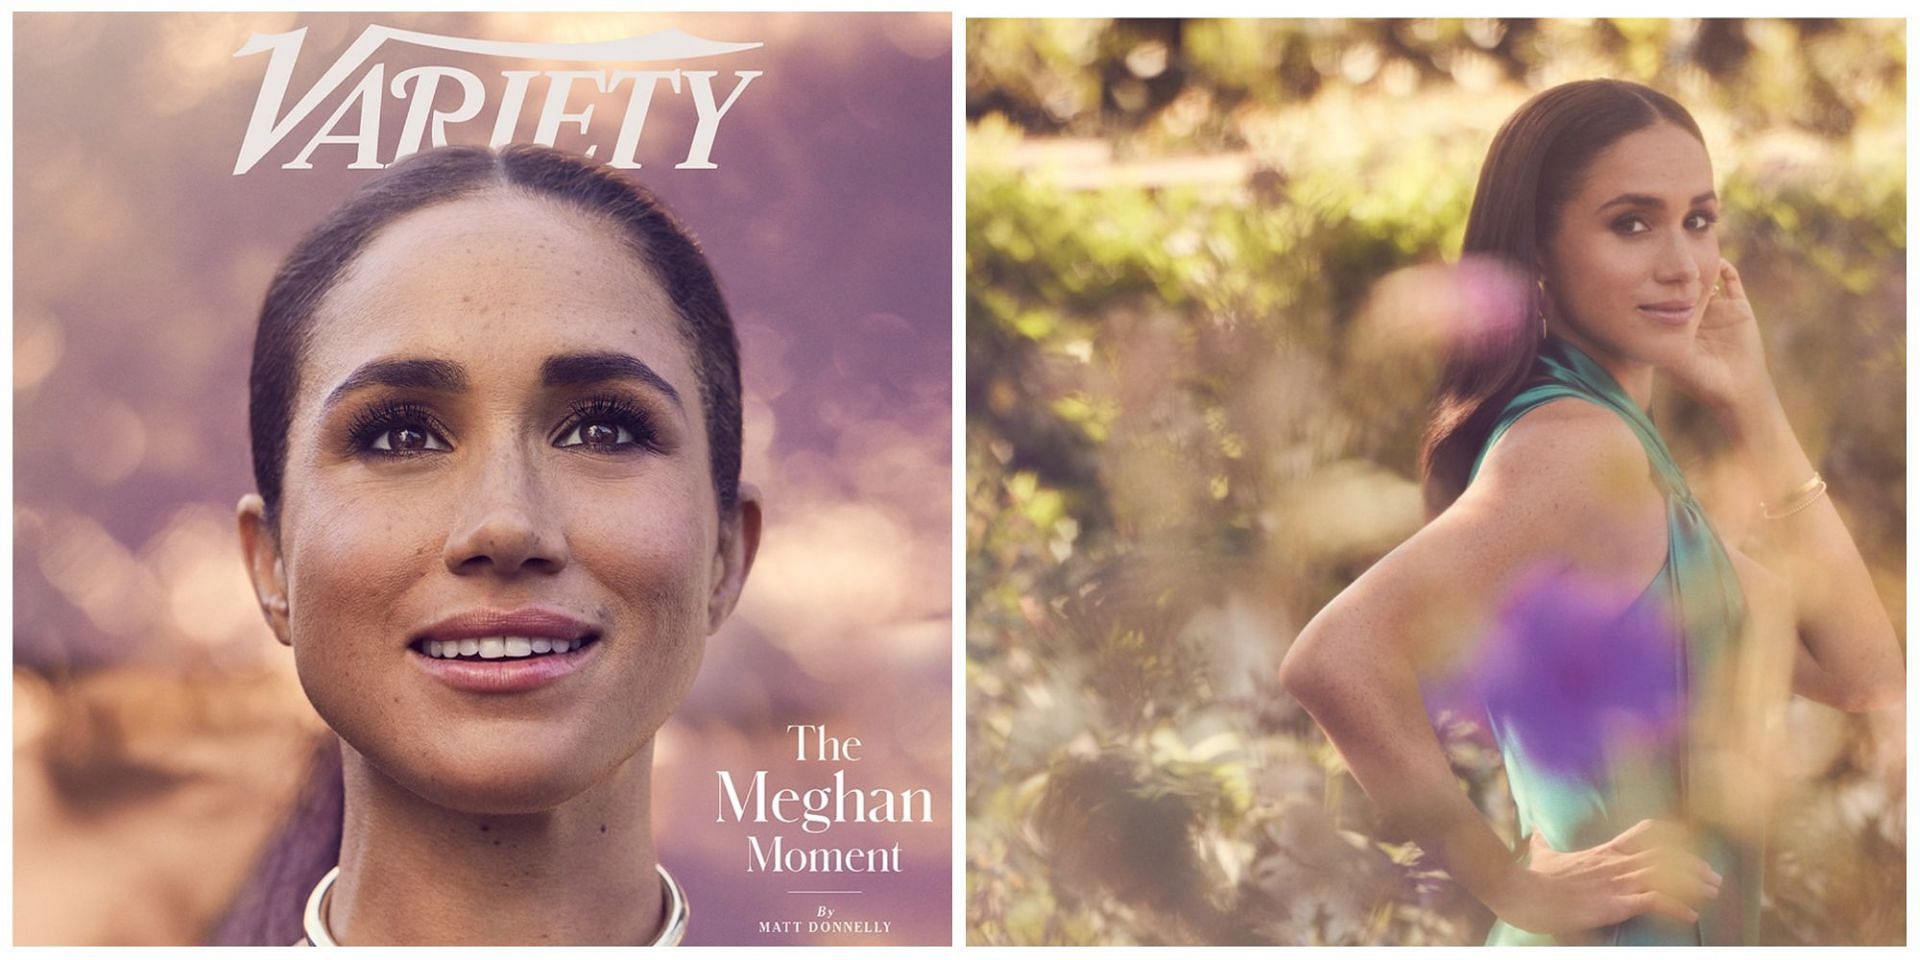 Details about the Variety magazine interview explored as Meghan Markle gets trolled for her answers. (Image via Variety Magazine)